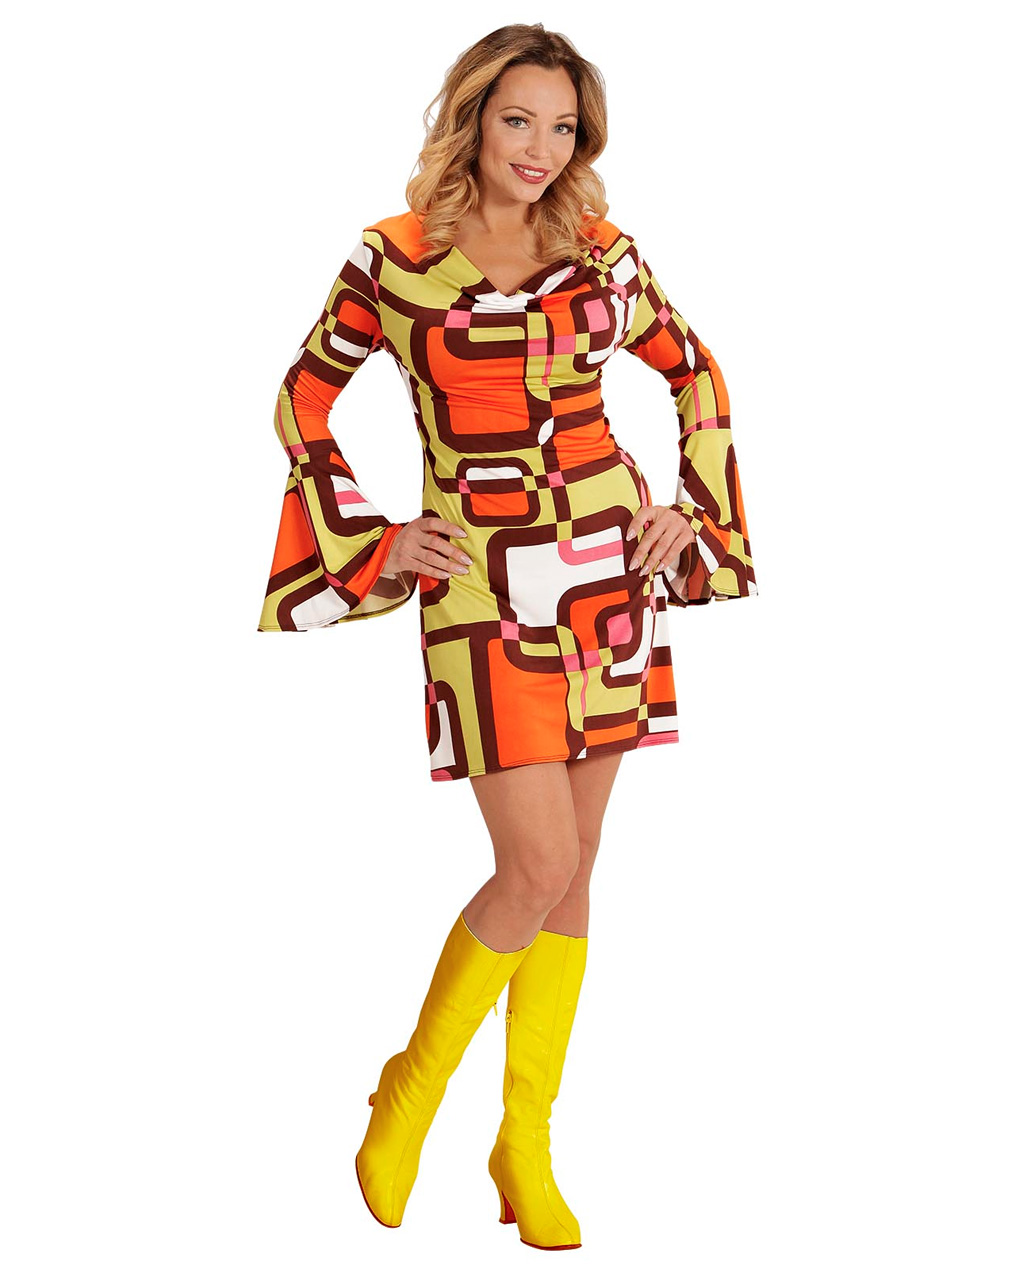 Groovy 70's Dress Tubes for 70s party